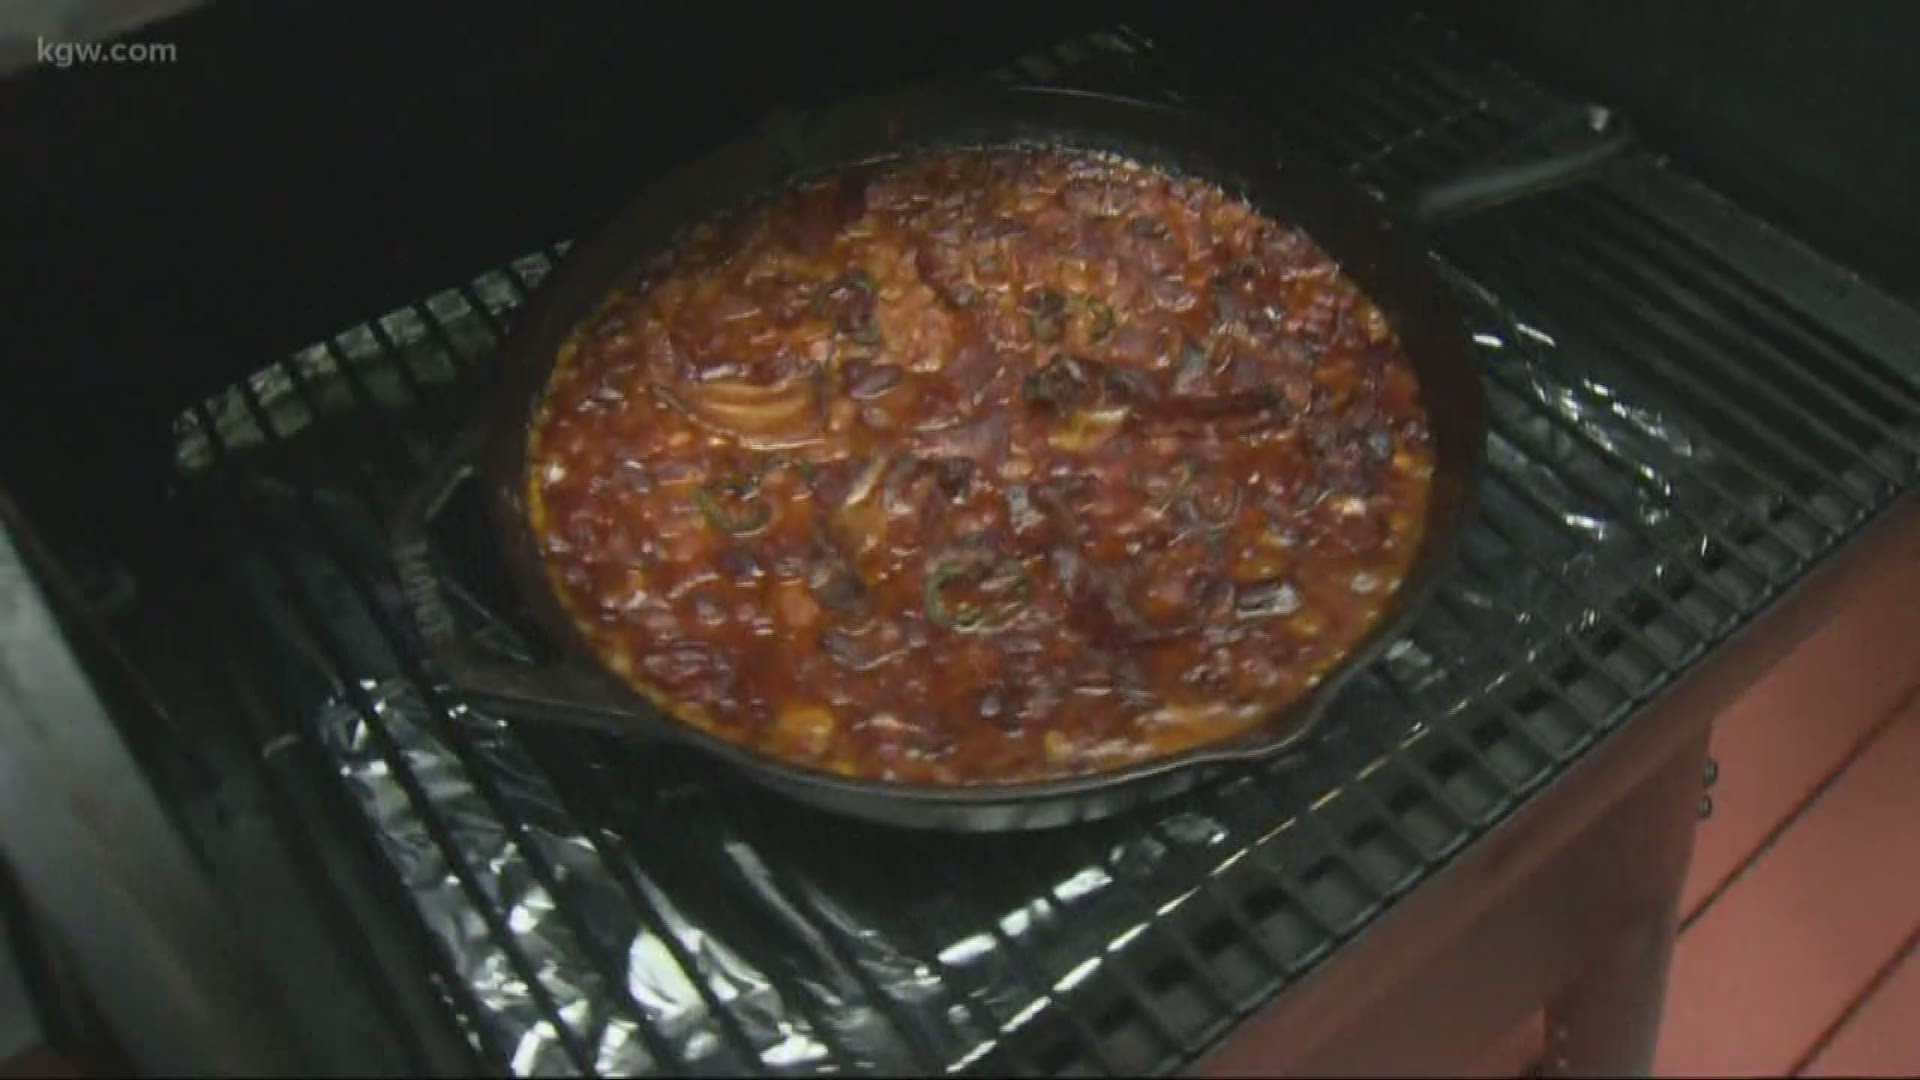 Drew Carney introduces us to Jamie from West Linn, who cooks up barbecue baked beans in a Traeger grill.